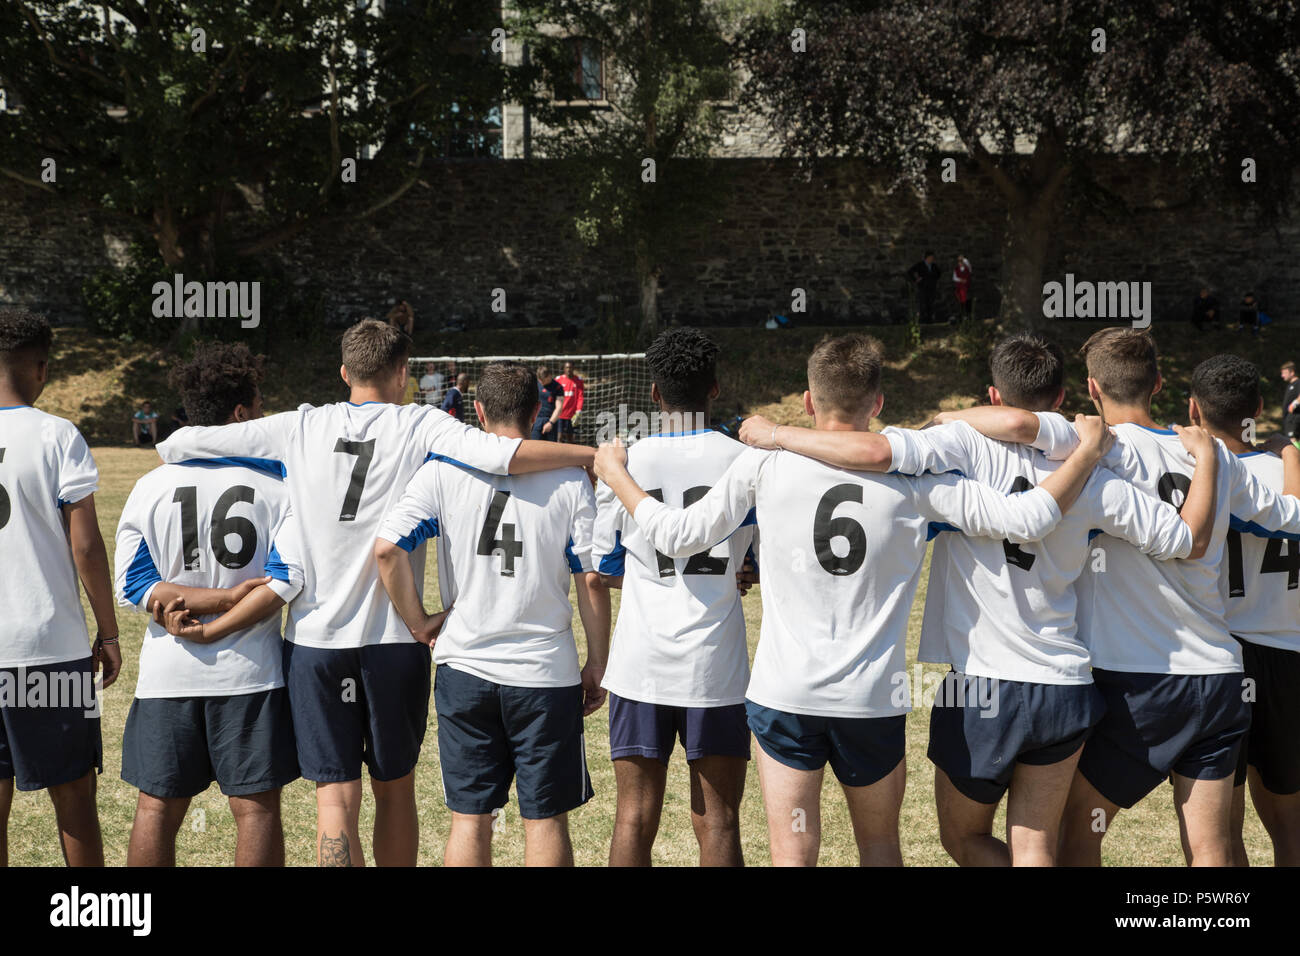 Football team watch penalty shoot out. Stock Photo